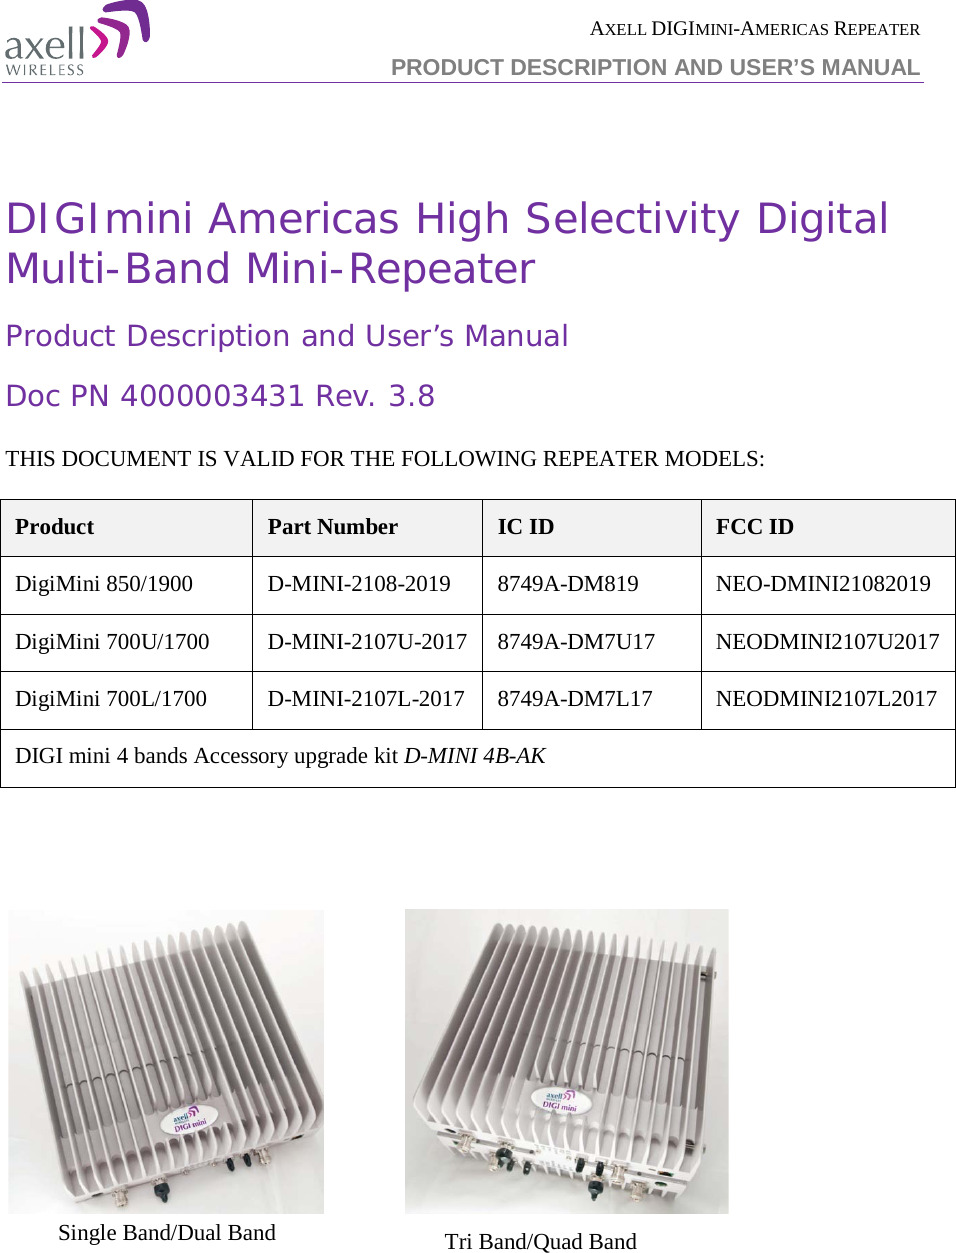 AXELL DIGIMINI-AMERICAS REPEATER PRODUCT DESCRIPTION AND USER’S MANUAL    DIGImini Americas High Selectivity Digital Multi-Band Mini-Repeater Product Description and User’s Manual Doc PN 4000003431 Rev. 3.8  THIS DOCUMENT IS VALID FOR THE FOLLOWING REPEATER MODELS:  Product Part Number IC ID FCC ID DigiMini 850/1900  D-MINI-2108-2019  8749A-DM819  NEO-DMINI21082019 DigiMini 700U/1700  D-MINI-2107U-2017  8749A-DM7U17  NEODMINI2107U2017 DigiMini 700L/1700  D-MINI-2107L-2017  8749A-DM7L17  NEODMINI2107L2017 DIGI mini 4 bands Accessory upgrade kit D-MINI 4B-AK                        Single Band/Dual Band  Tri Band/Quad Band  